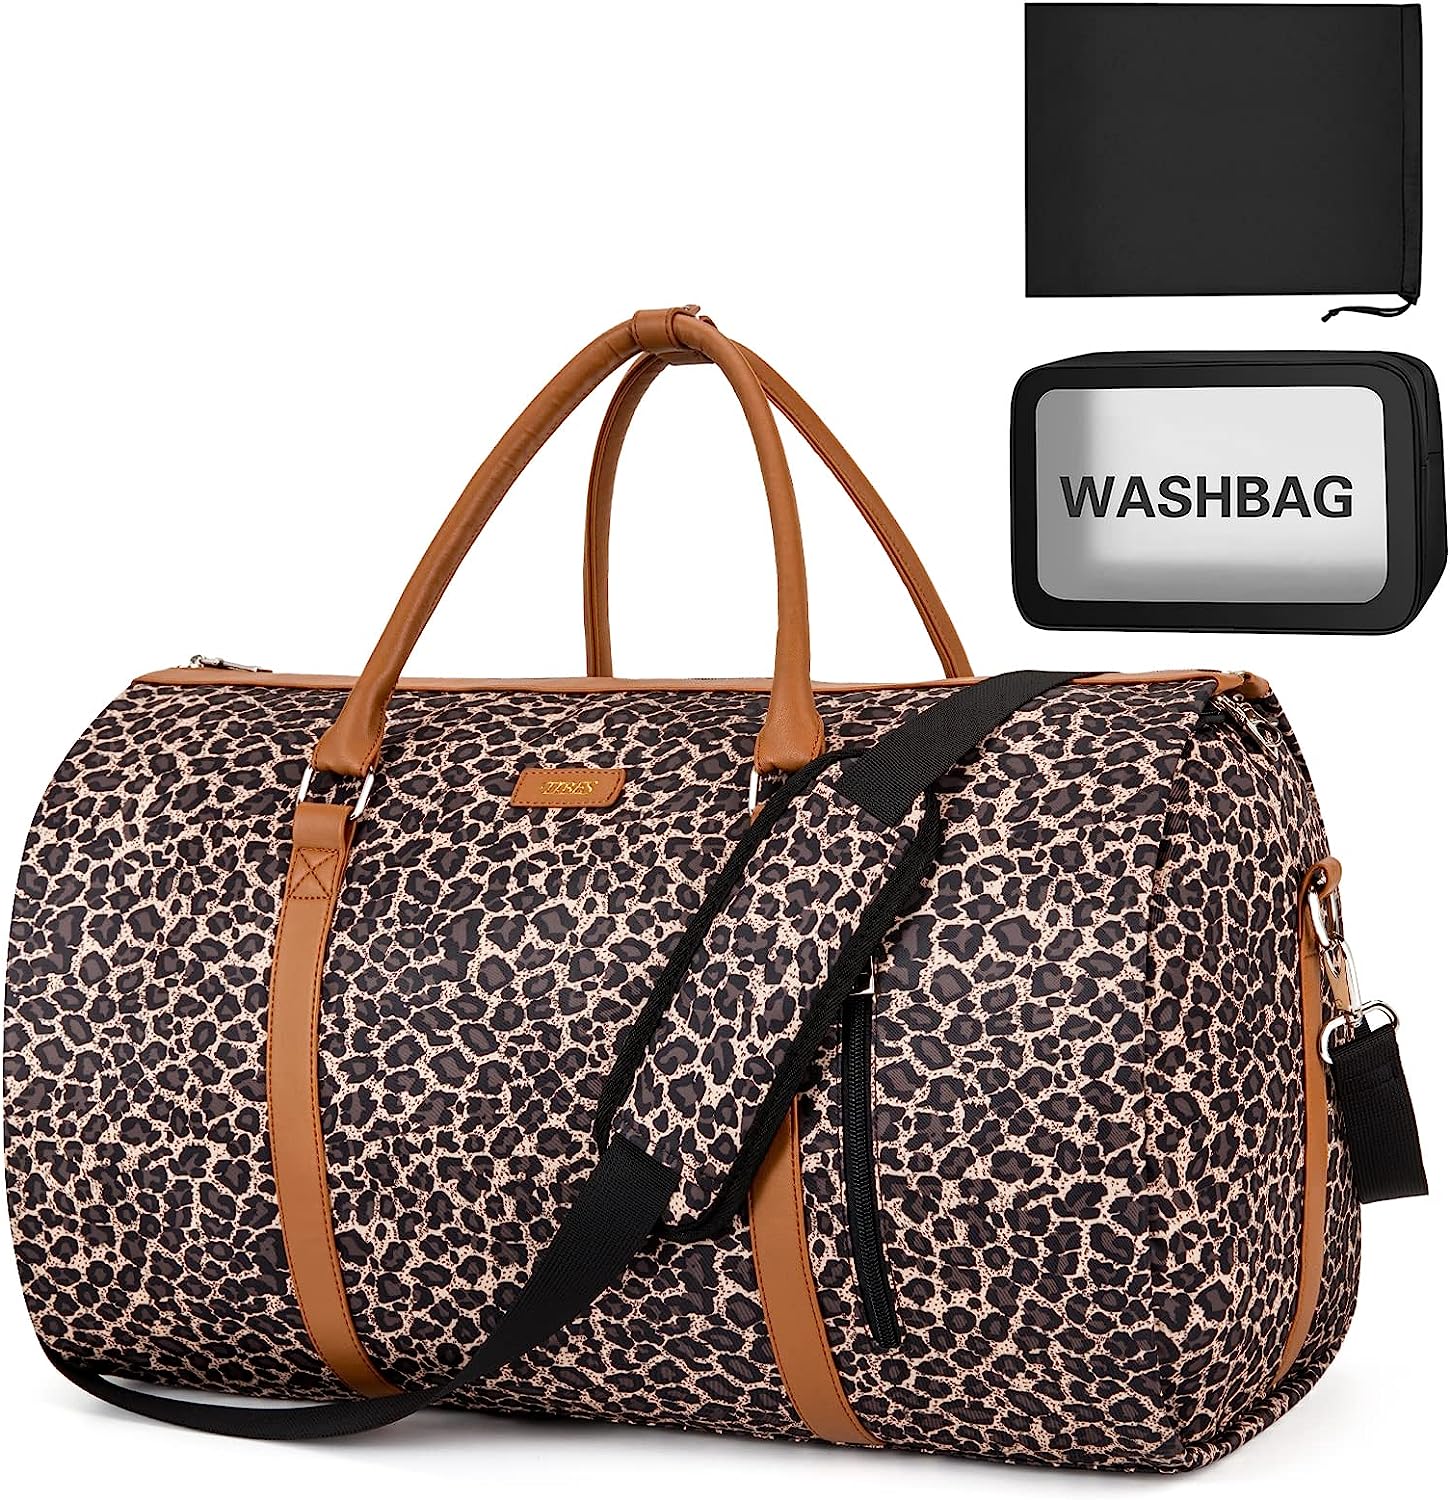 Garment Bag for Travel Convertible Carry On Garment Bag Large Travel Duffel Bags for Women 2 in 1 Hanging Suitcase Suit Travel Bags for Women & Men 3pcs Set, C-Brown Leopard